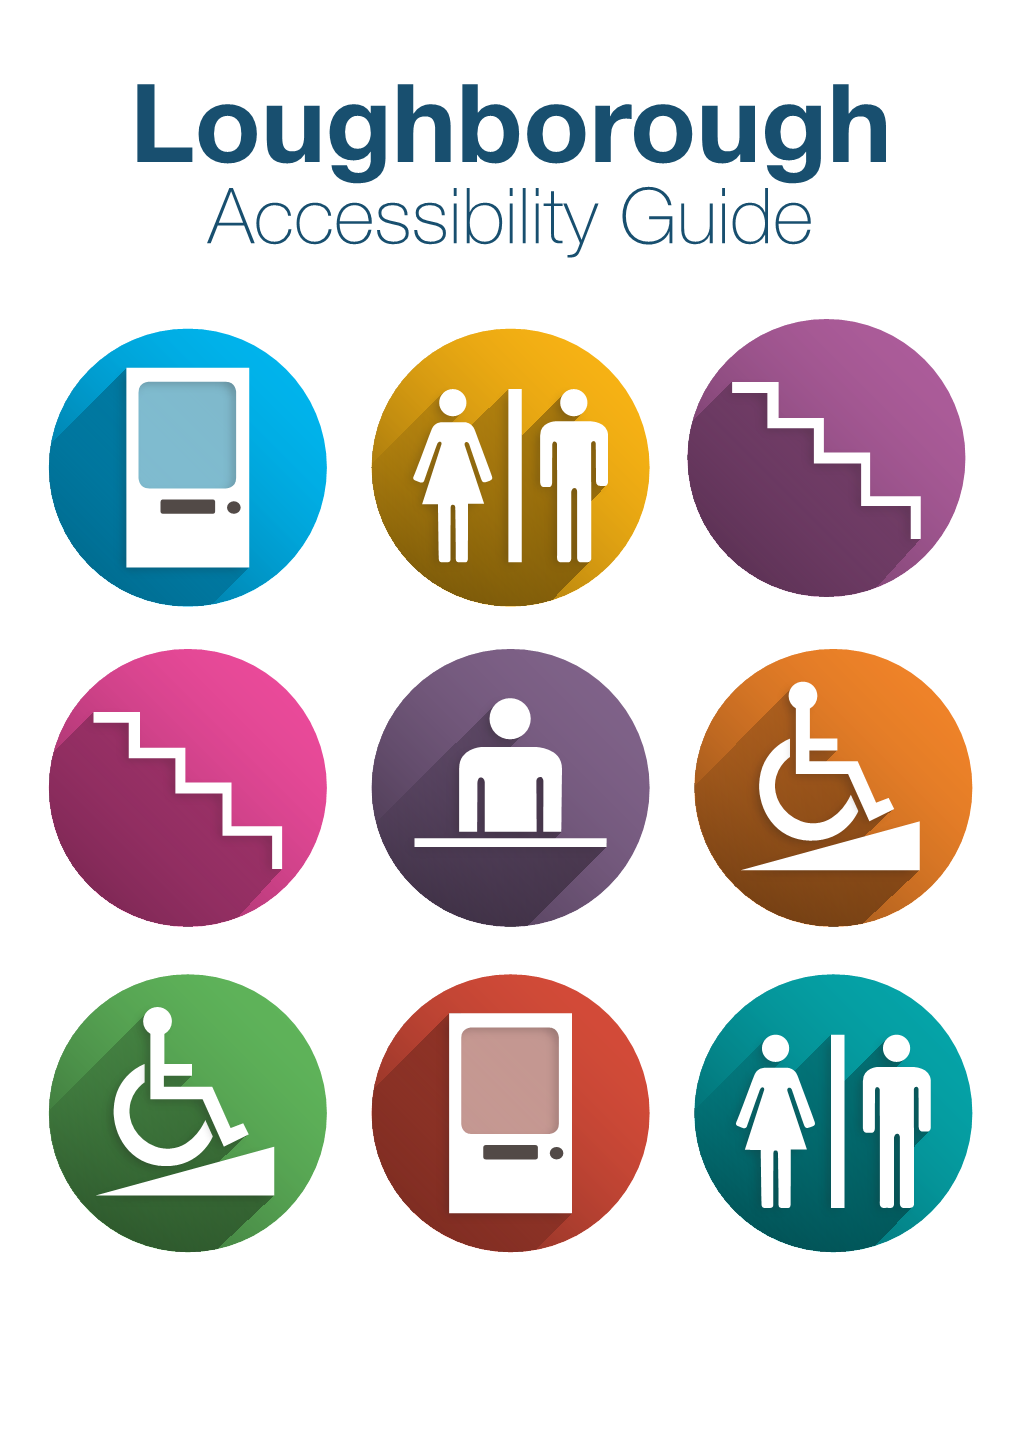 Disability Access Guide to Loughborough